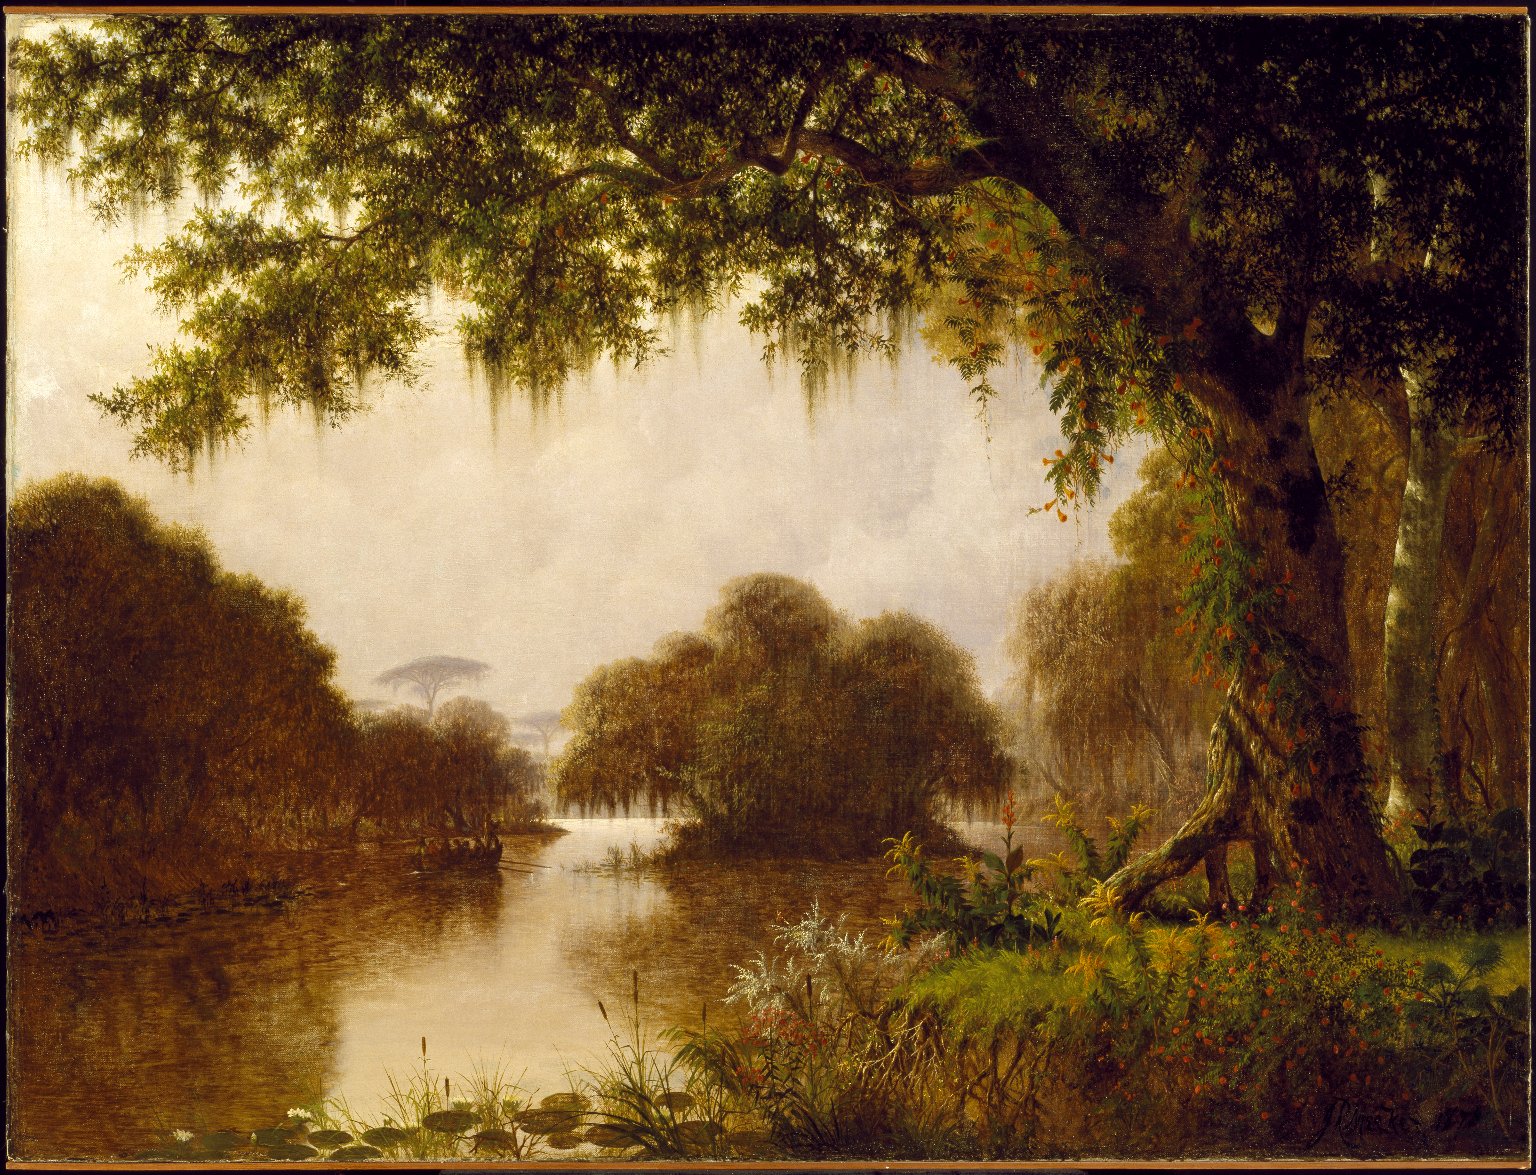 A nineteenth-century landscape painting showing a tranquil river scene with shade trees